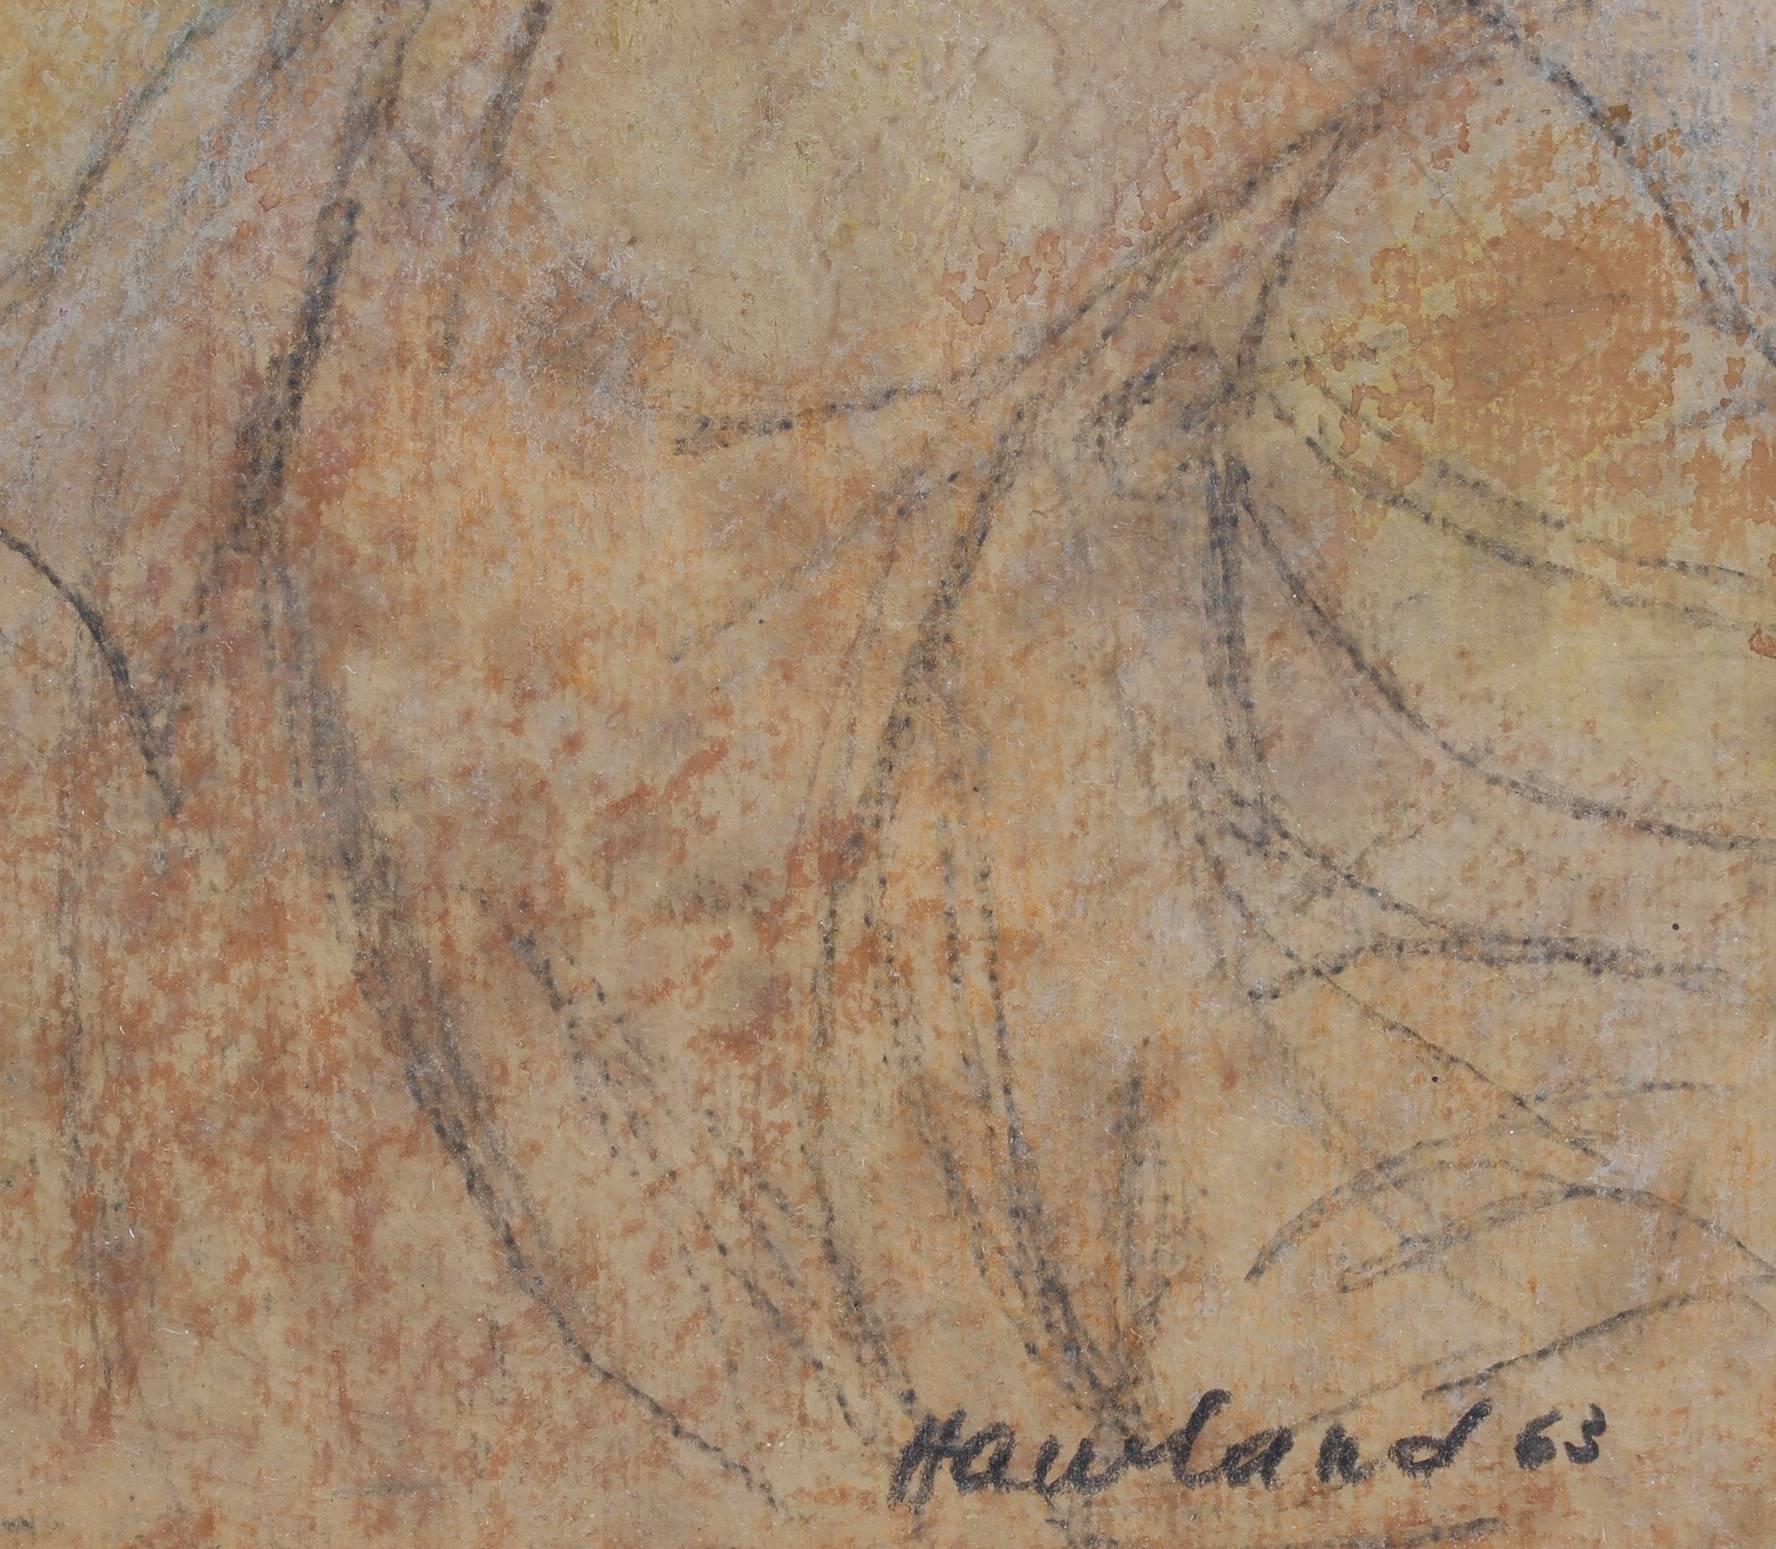 'Classical Figures', pastel crayon, graphite and gouache on paper by artist, Hawland (1963). A classical scene of nude figures reminiscent of a fresco from antiquity. Just like an actual fresco, this beautiful work, although signed, remains